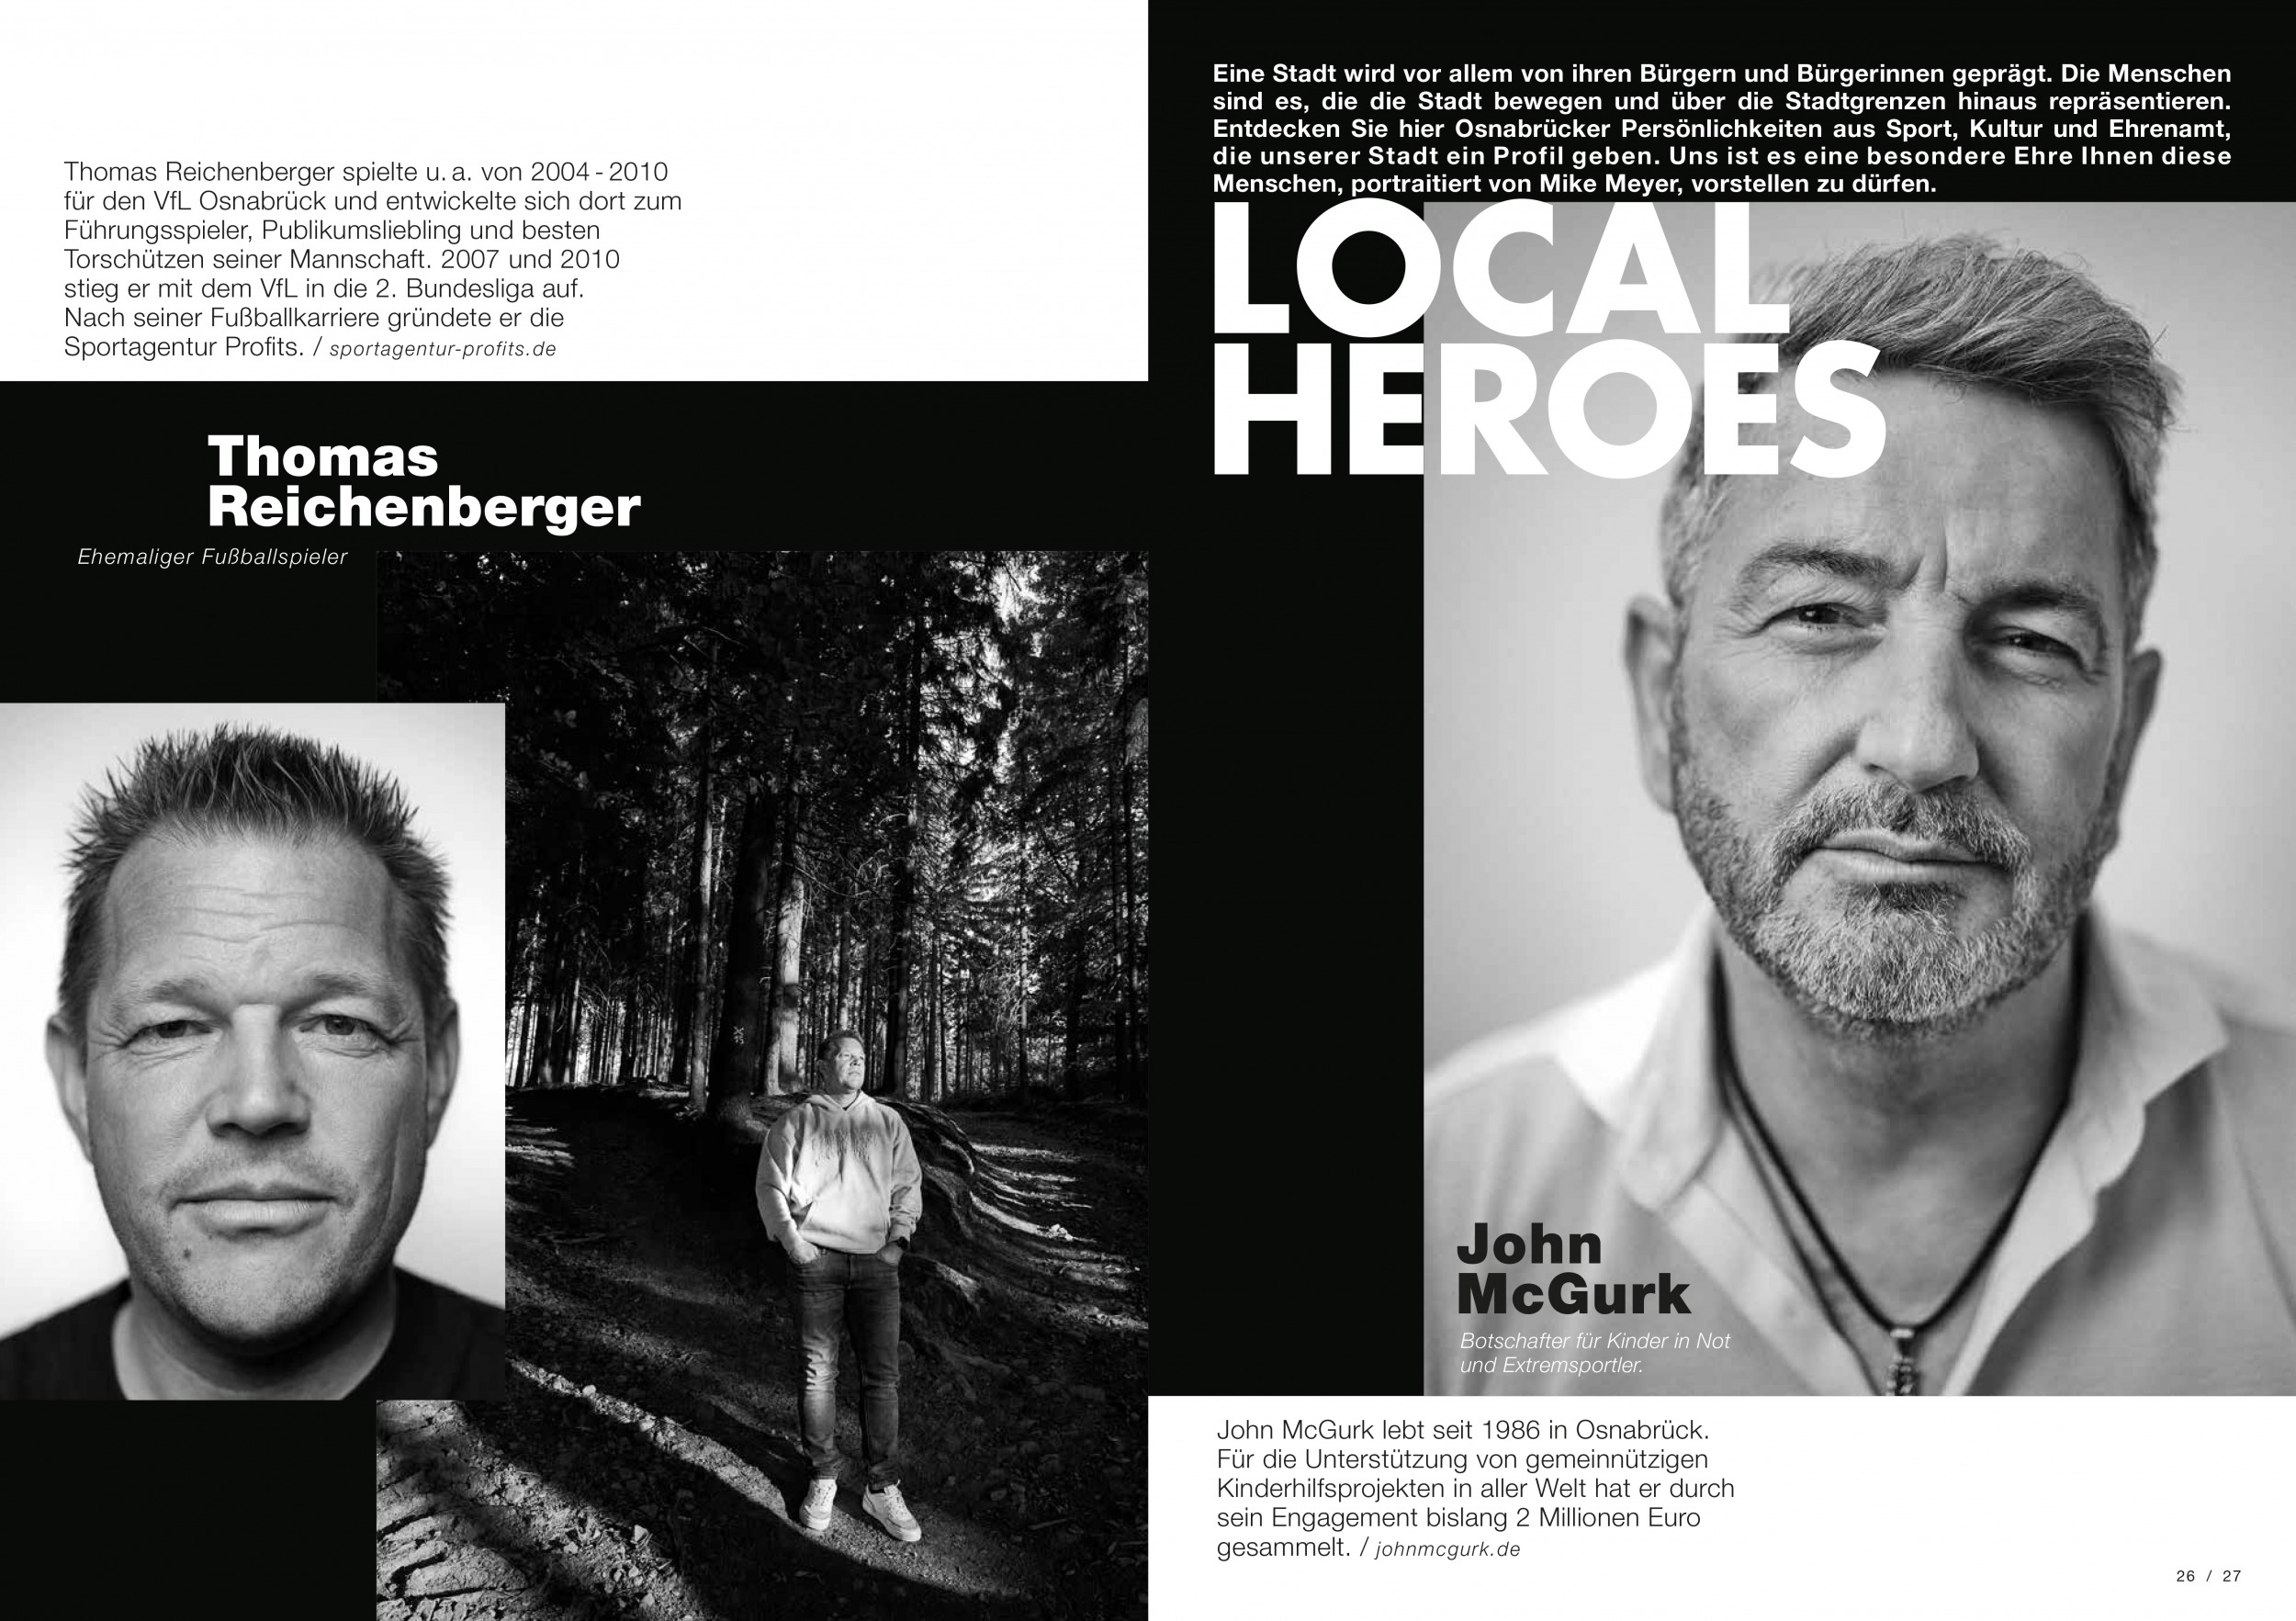 l-t local heroes portrait collection (3 images) by Mike Meyer Photography